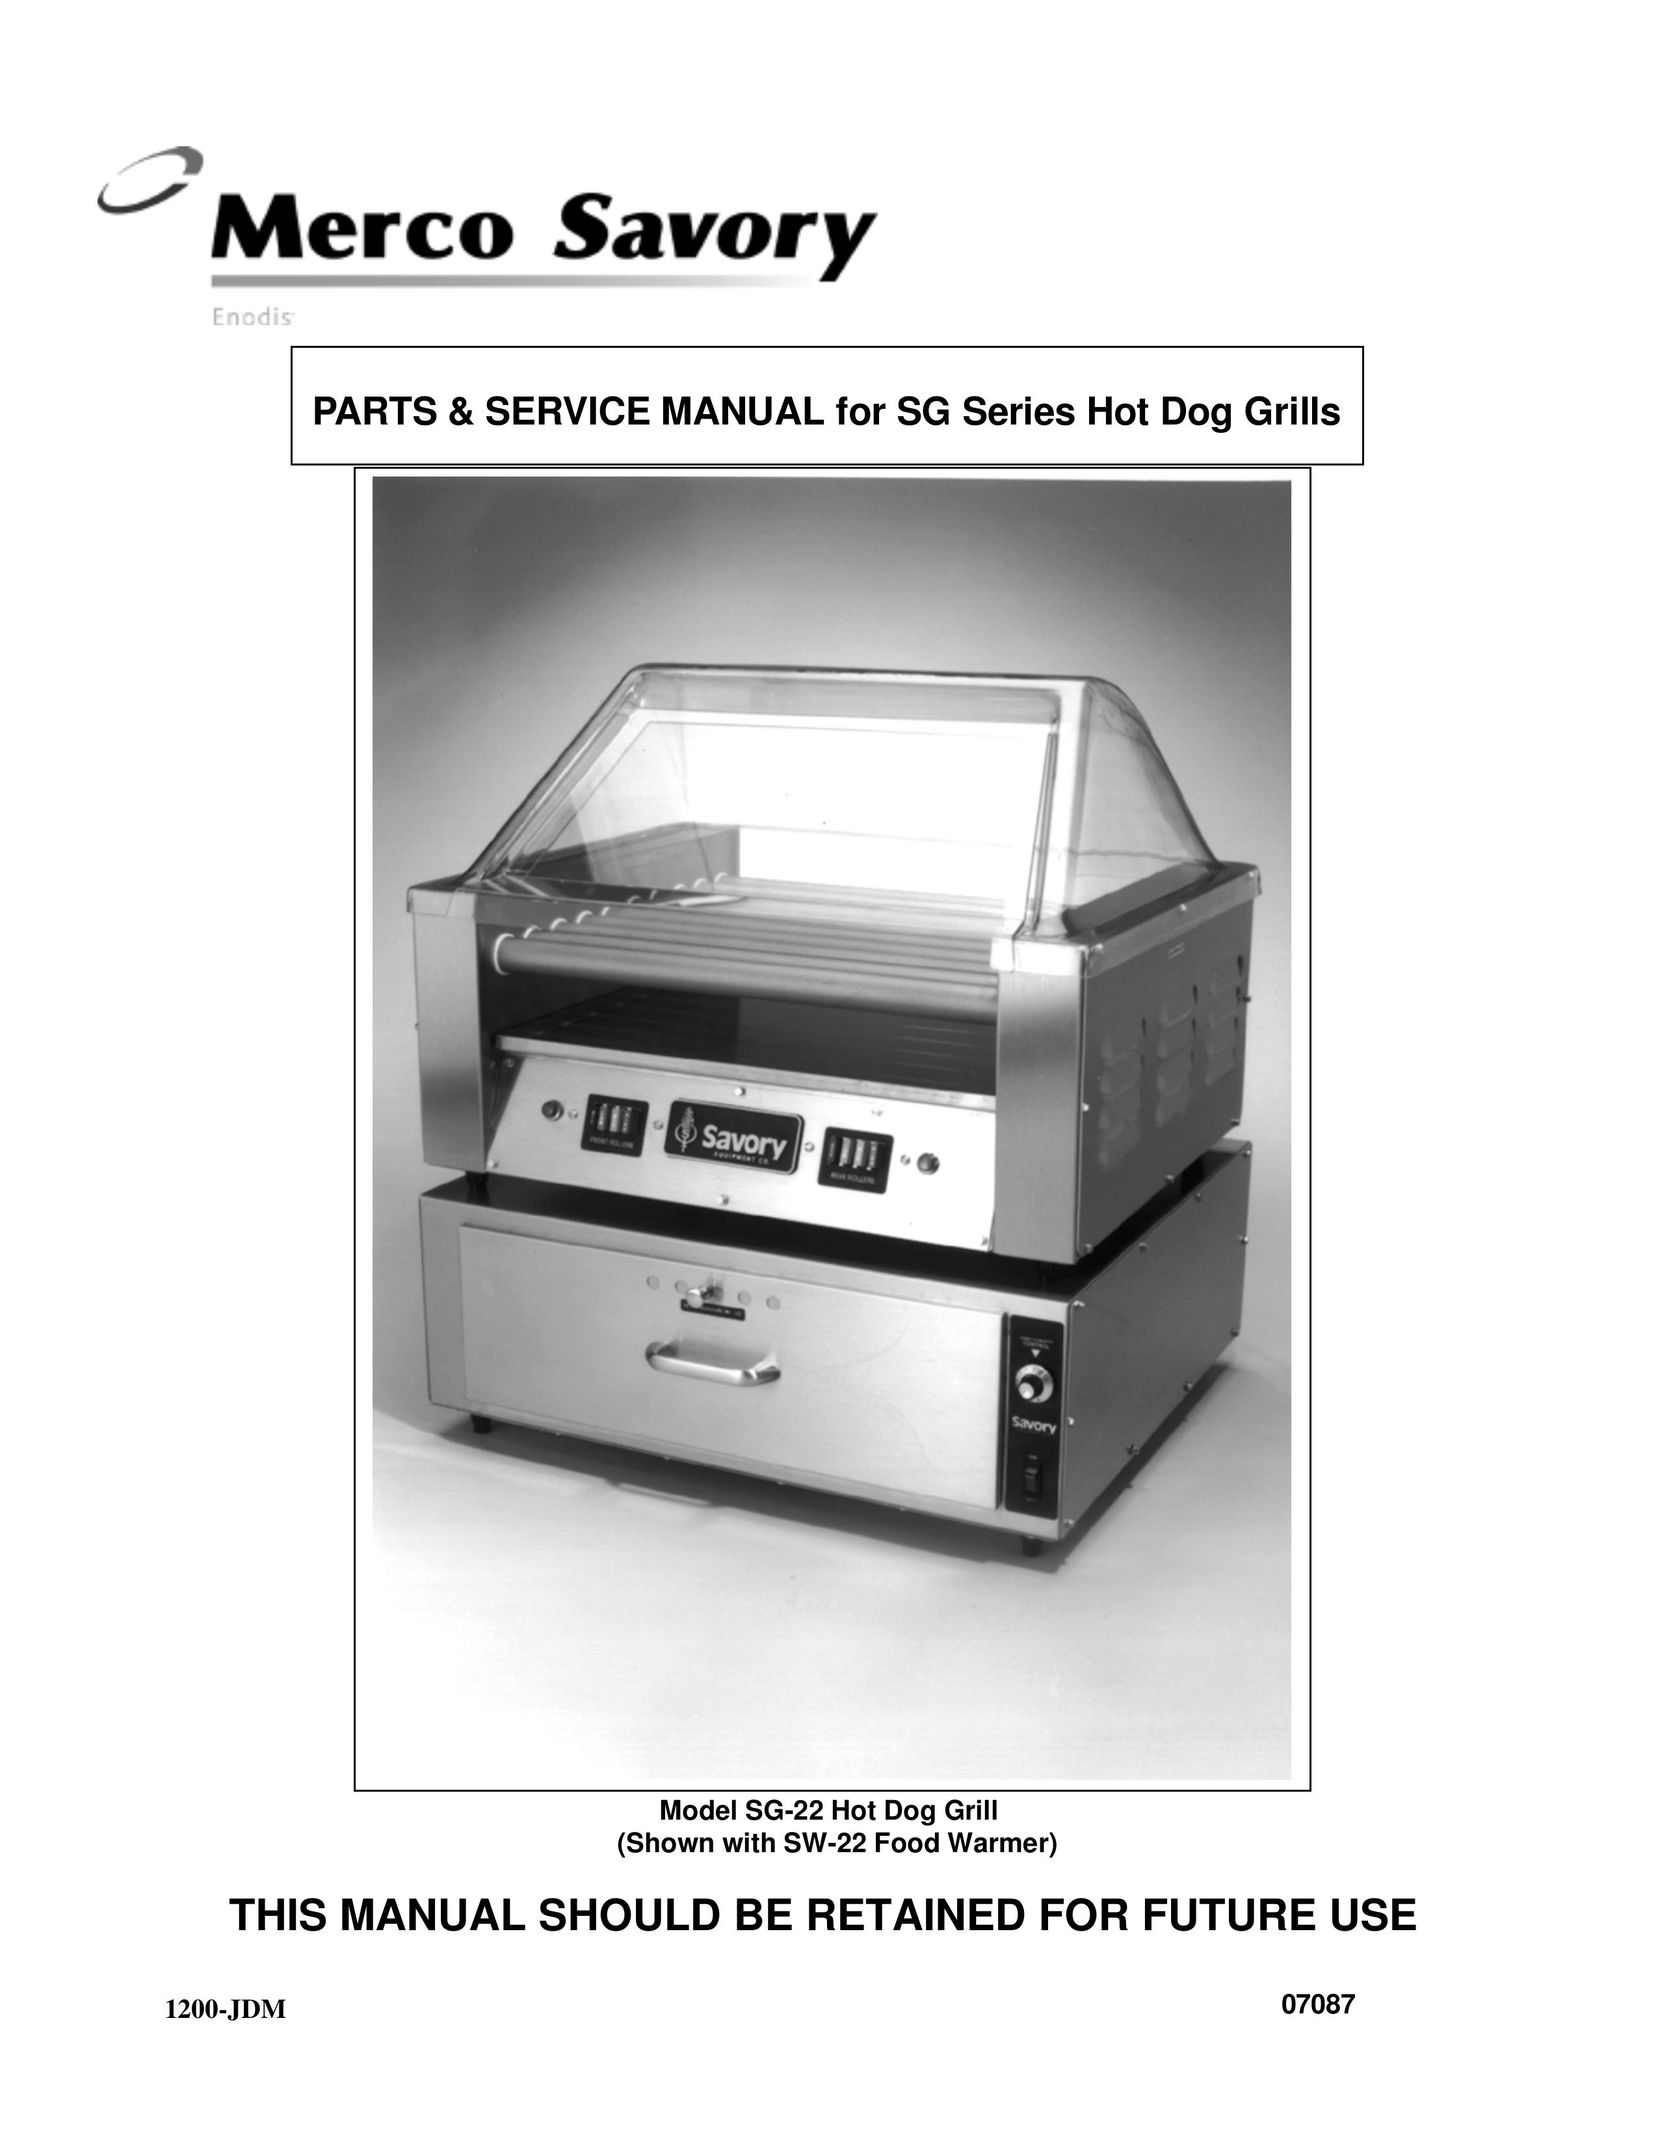 Merco Savory SG-22 Kitchen Grill User Manual